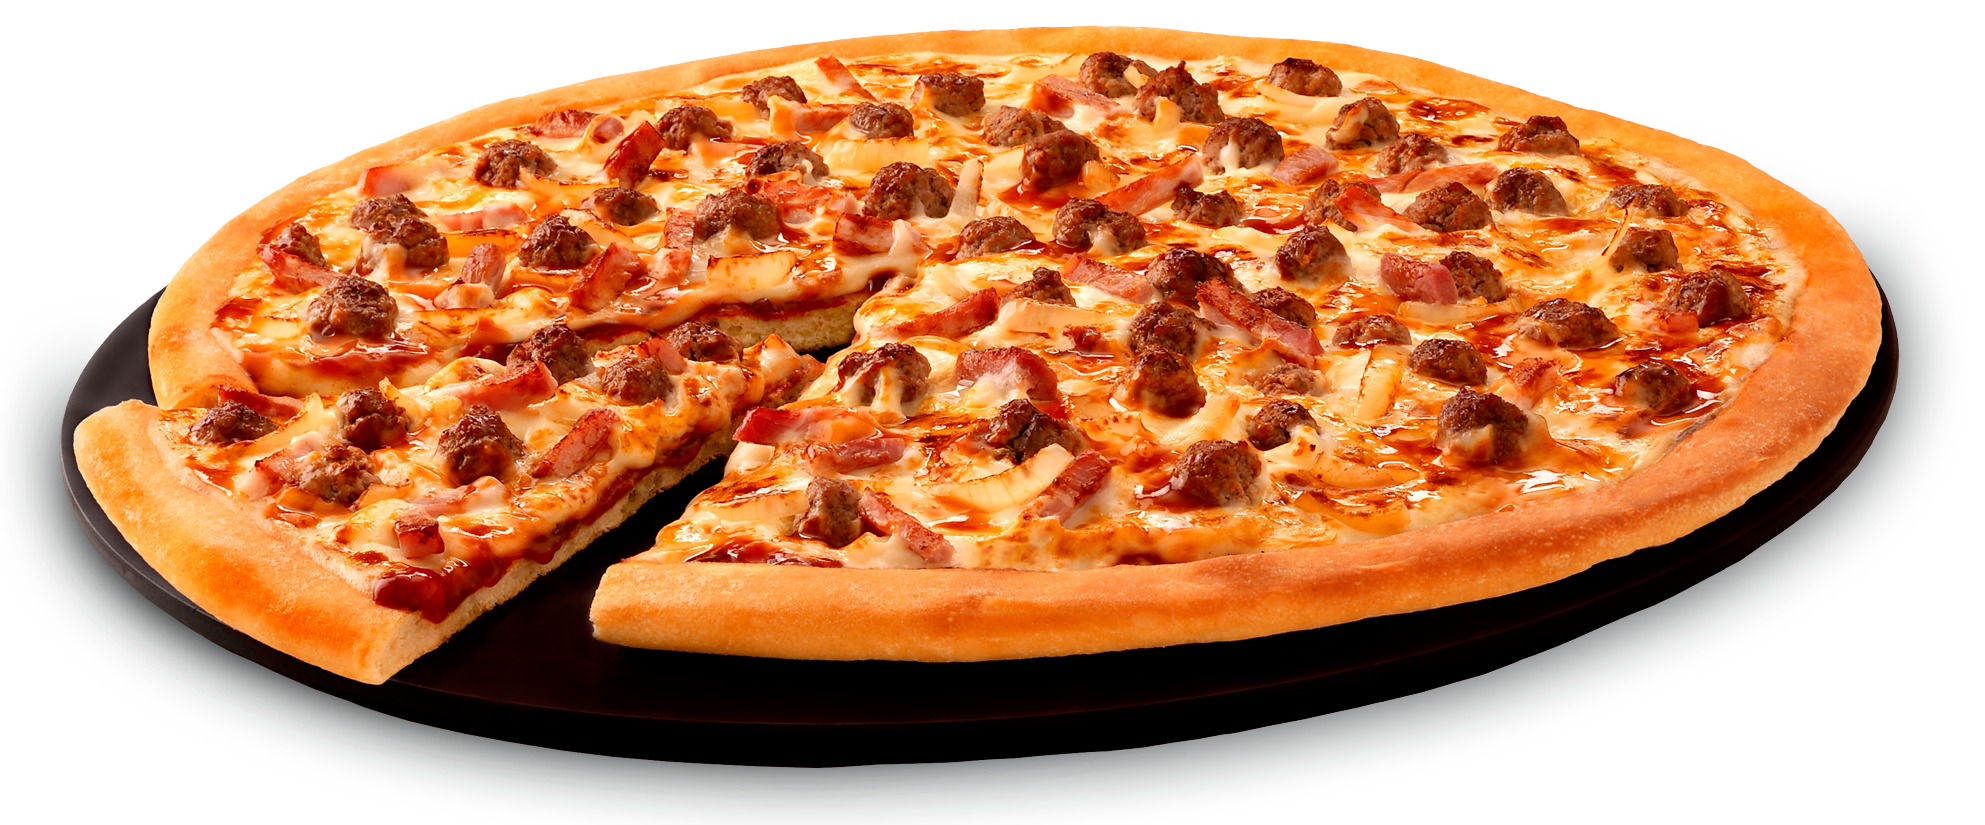 Pizza PNG Transparent Background, Free Download #19363 - FreeIconsPNG